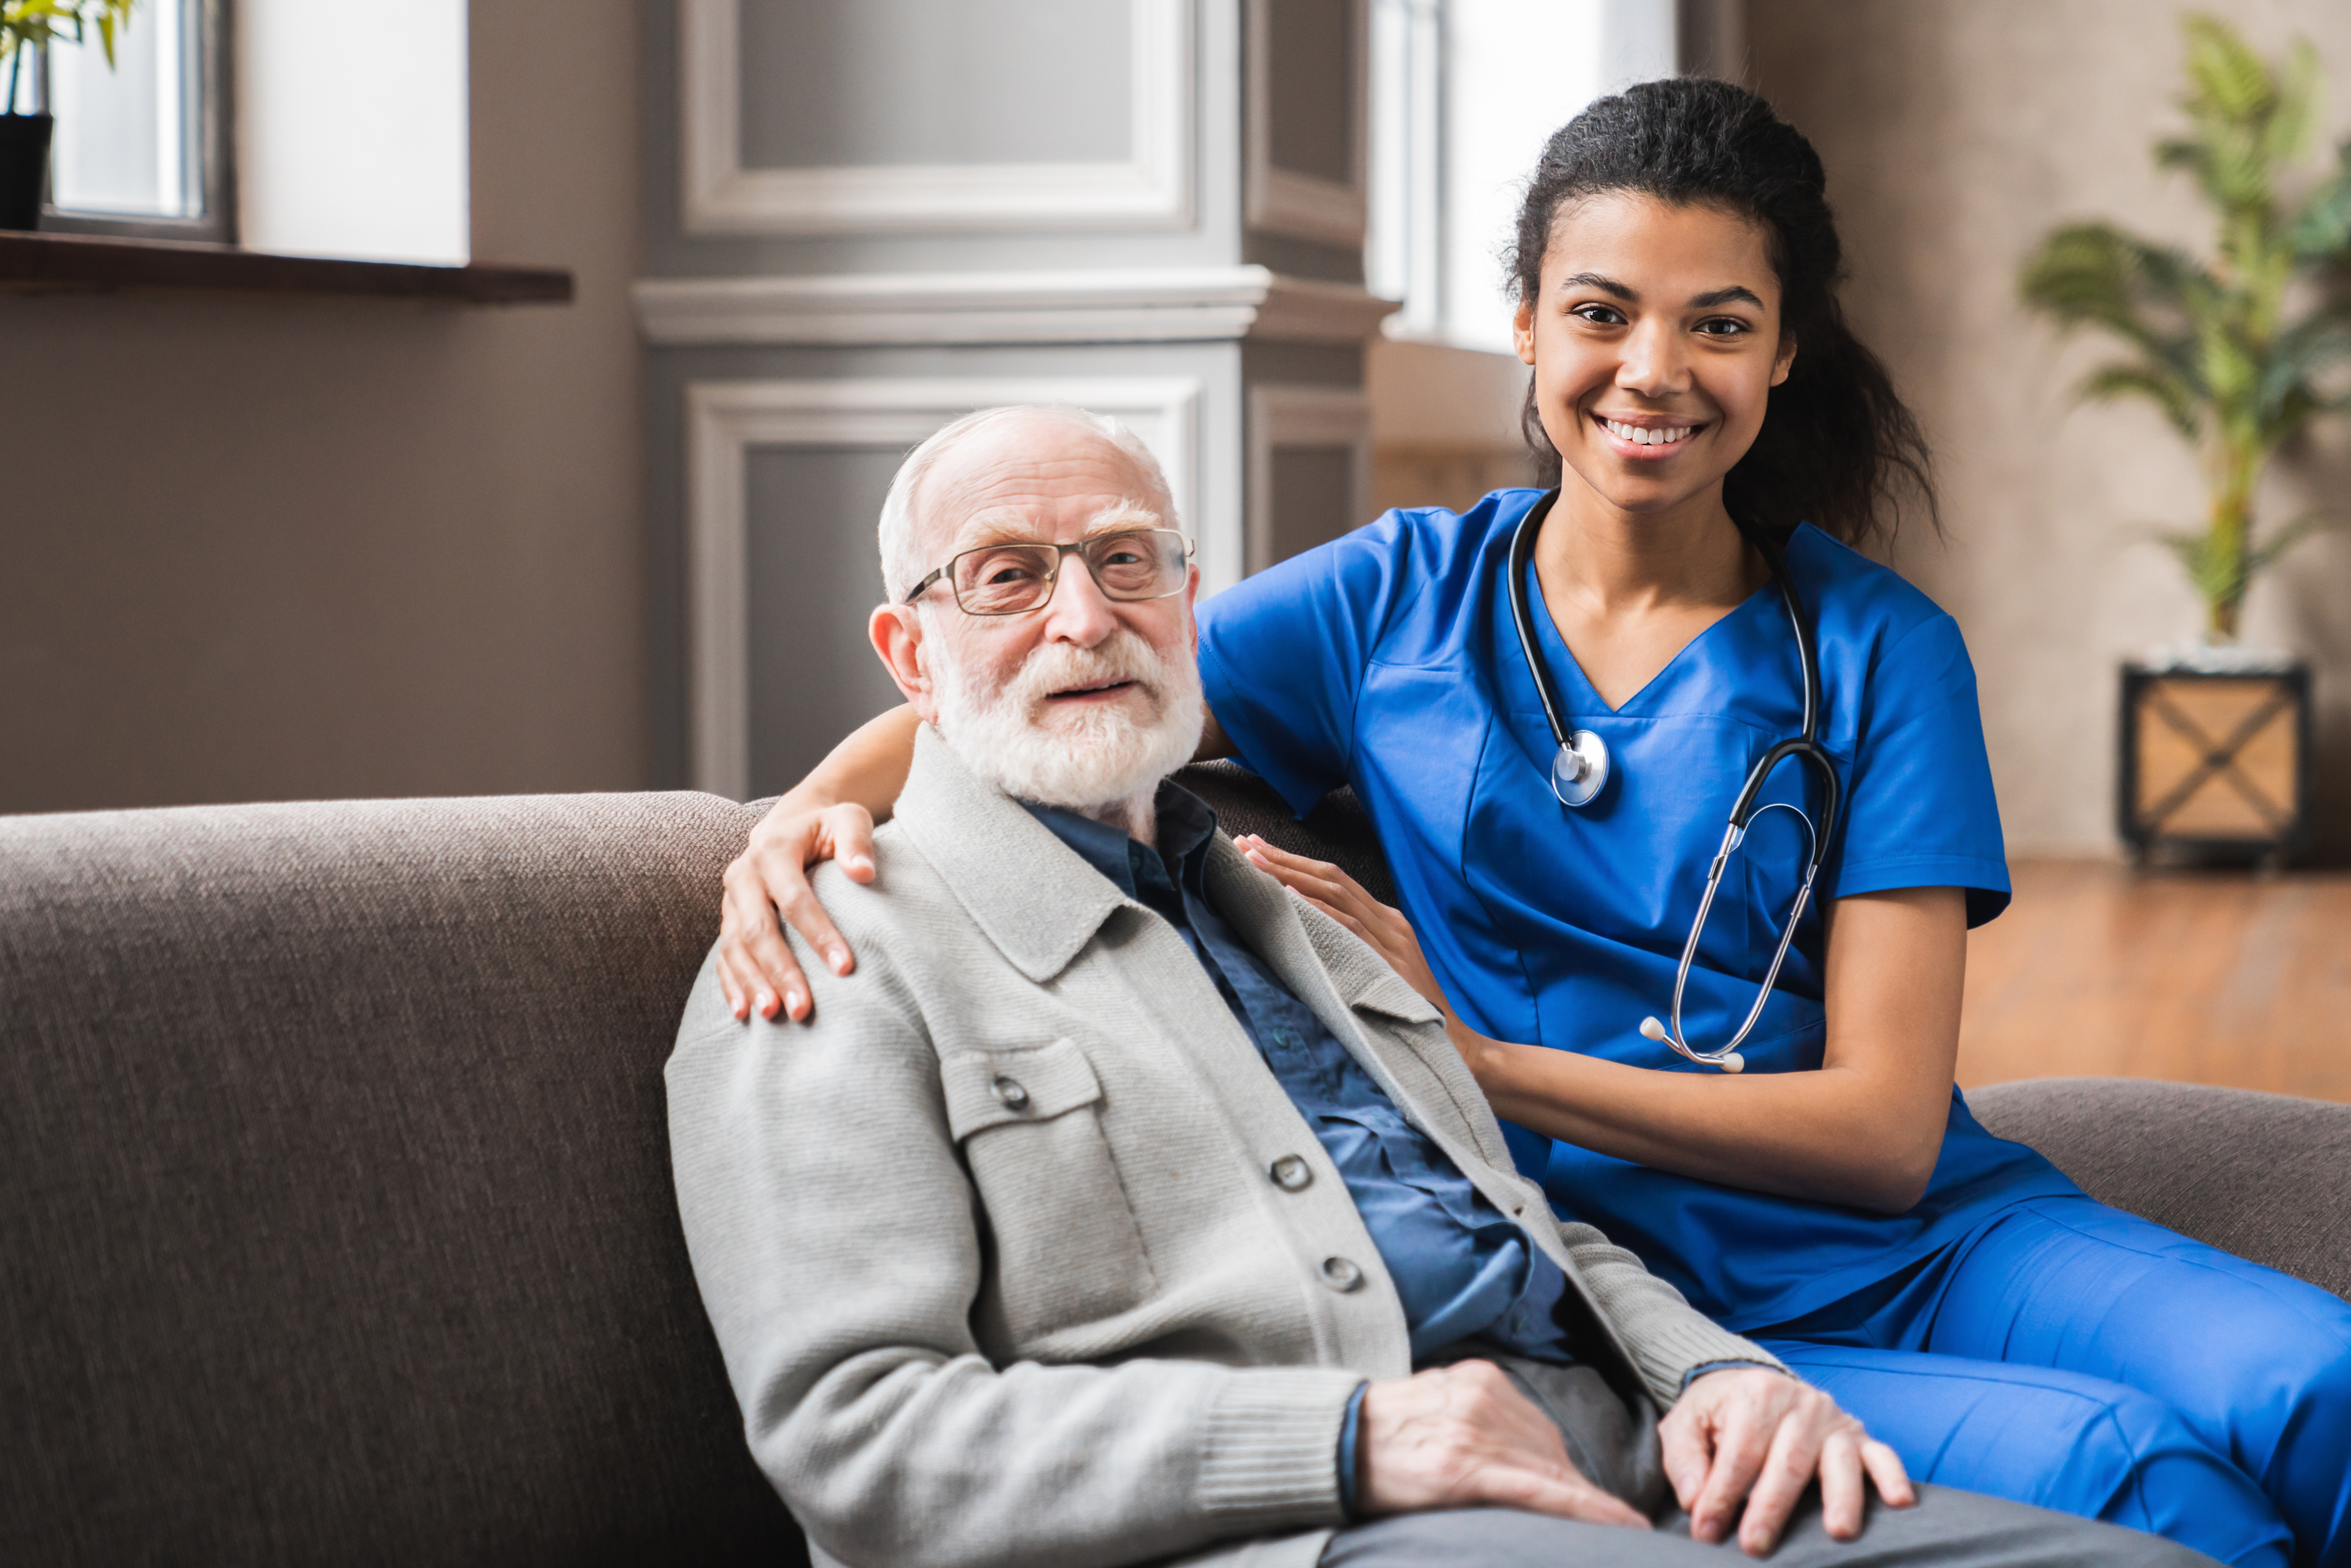 Health care aide with her arm around an elderly client